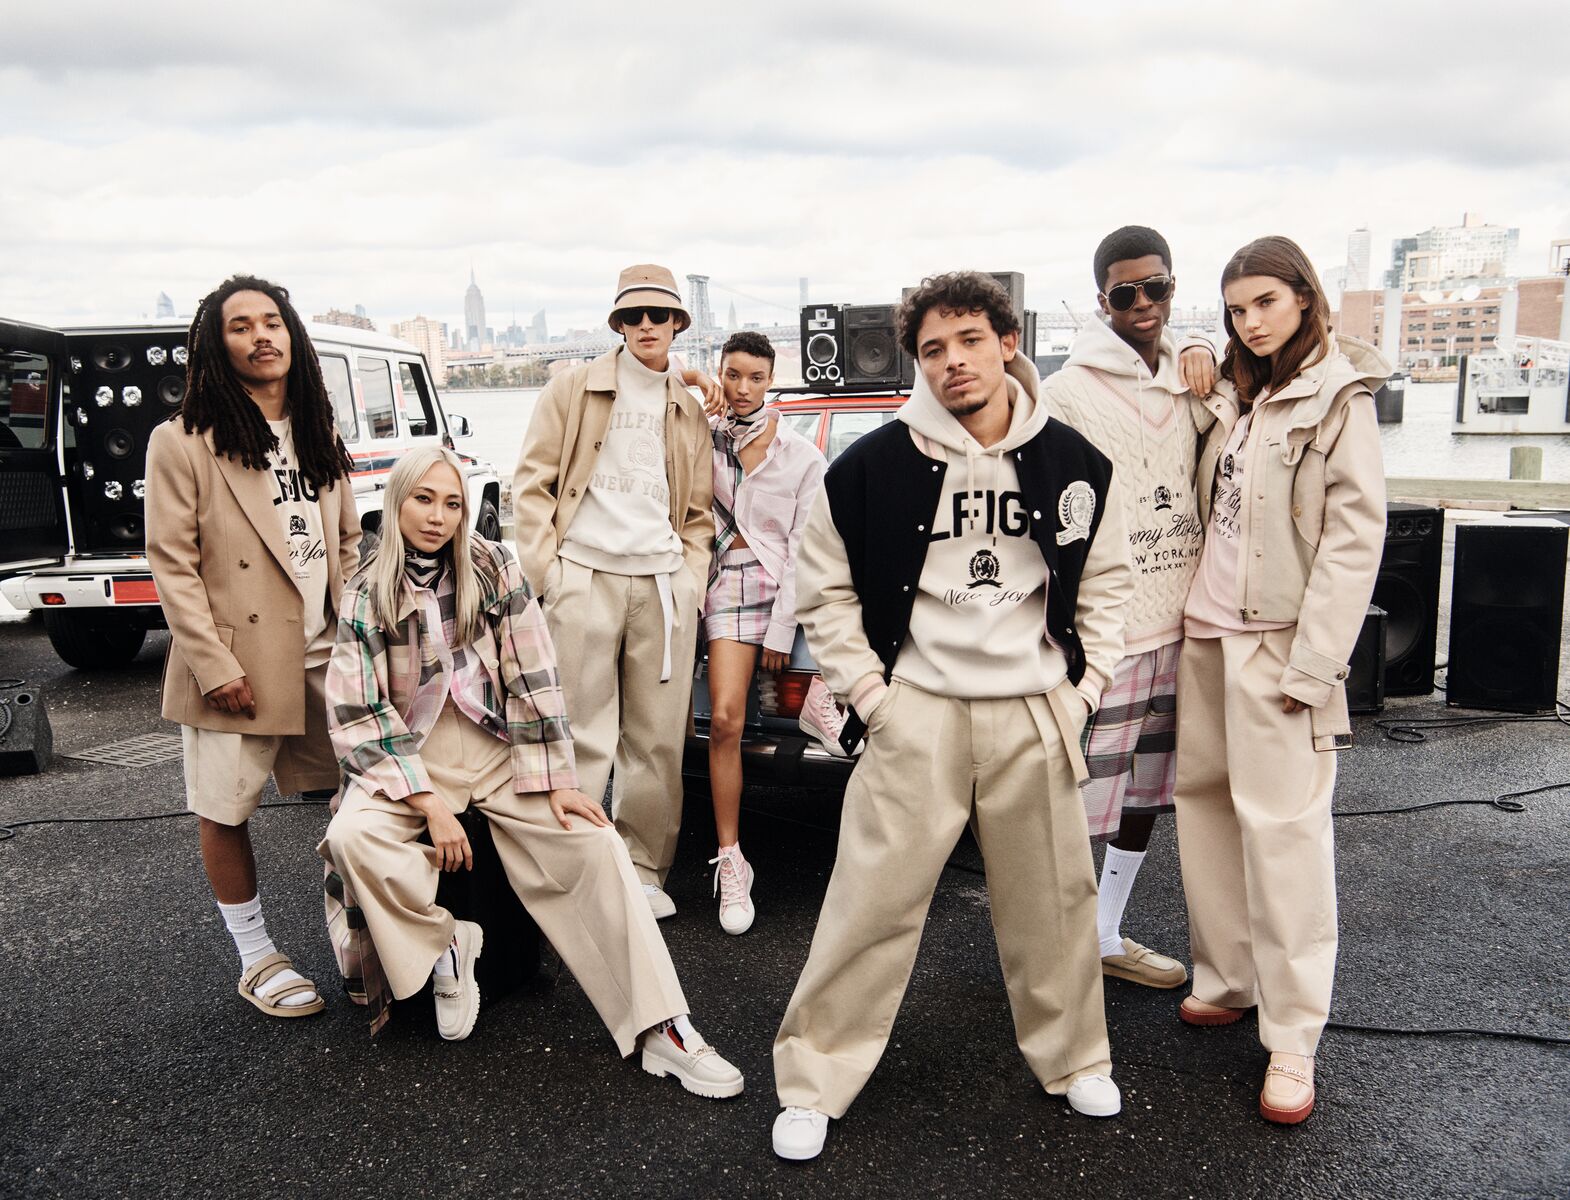 TOMMY HILFIGER CELEBRATES ICONIC STYLE SPRING 2022 “MAKE YOUR MOVE” BRAND CAMPAIGN - Numéro